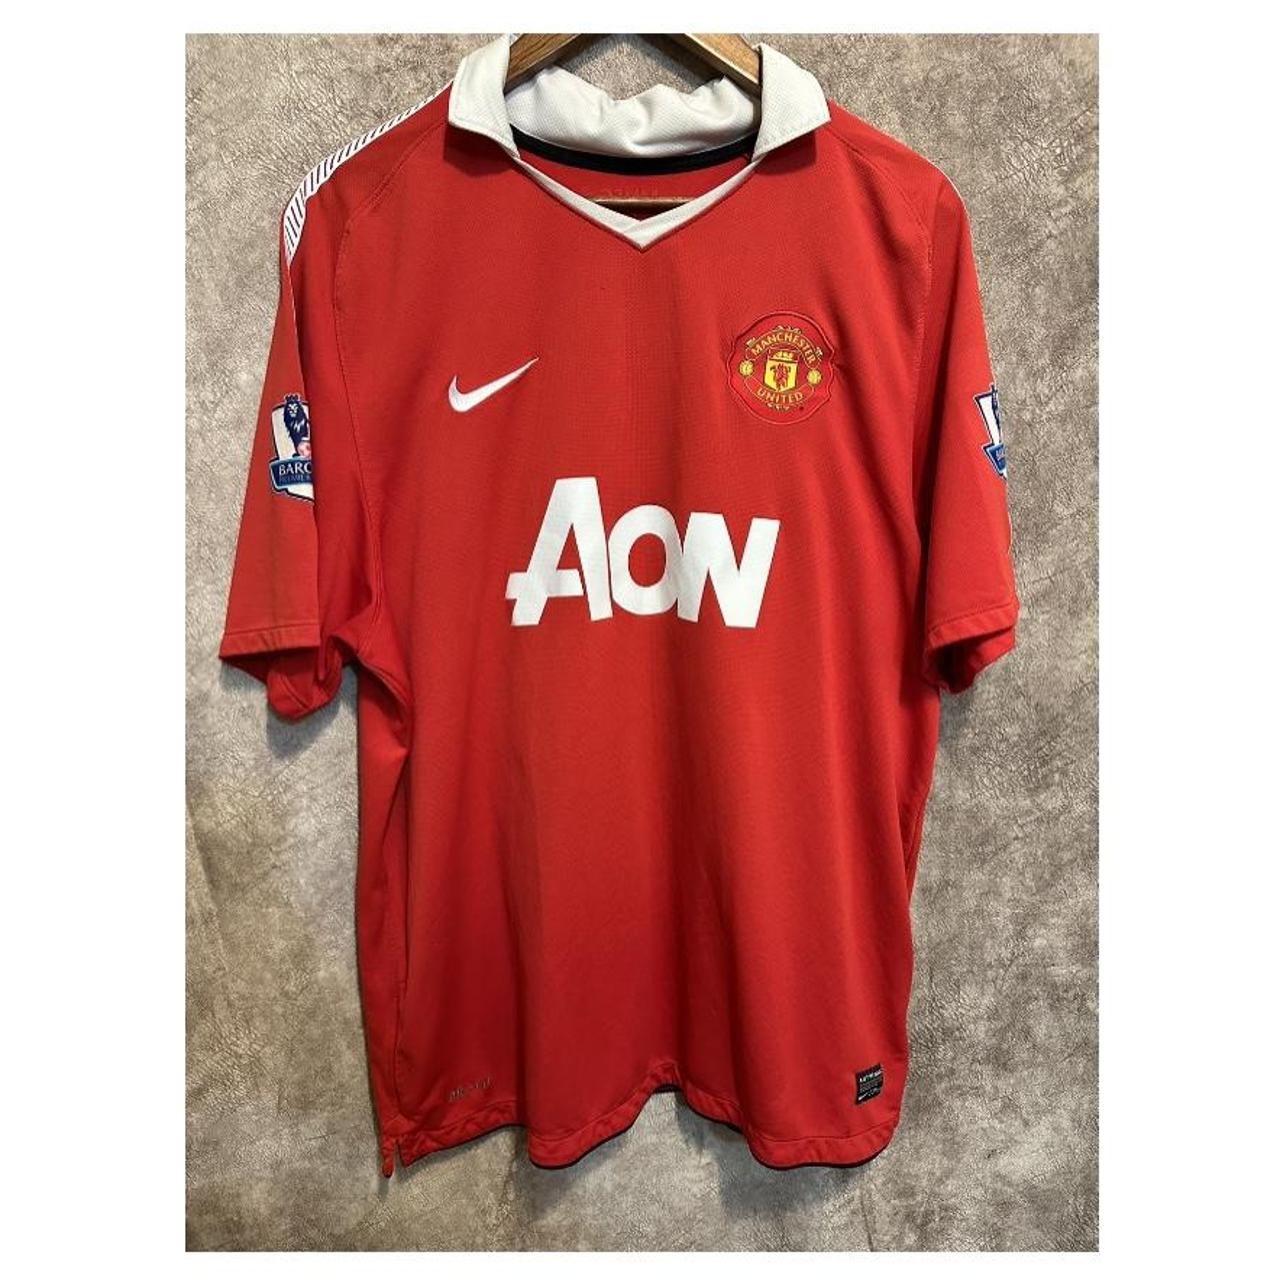 Retro Manchester United Away Jersey 2010/11 By Nike